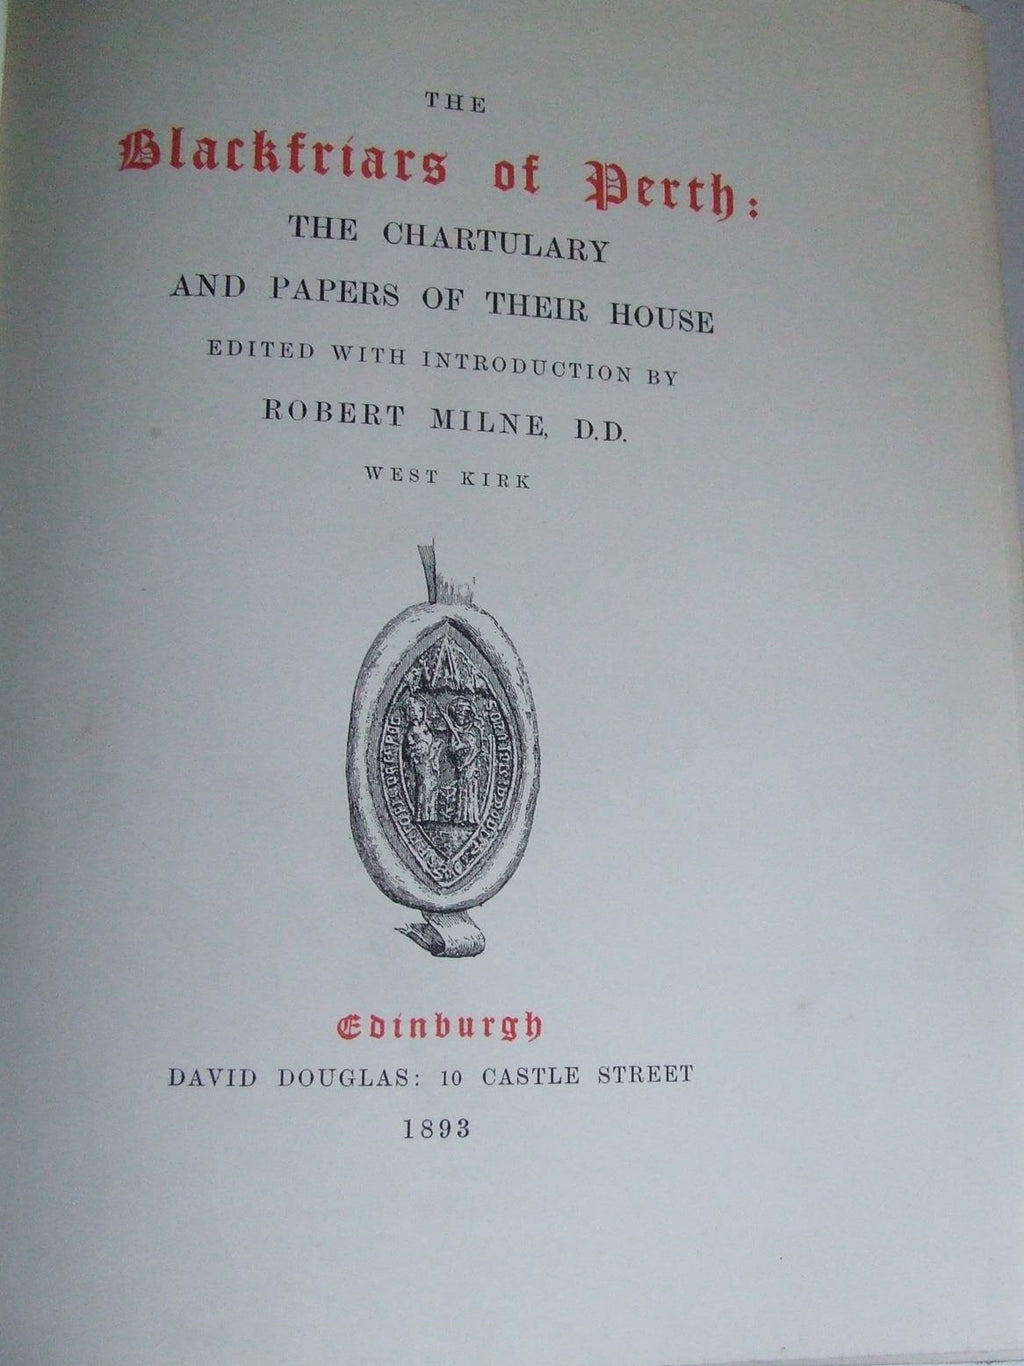 The Blackfriars of Perth: the Chartulary and Papers of their House